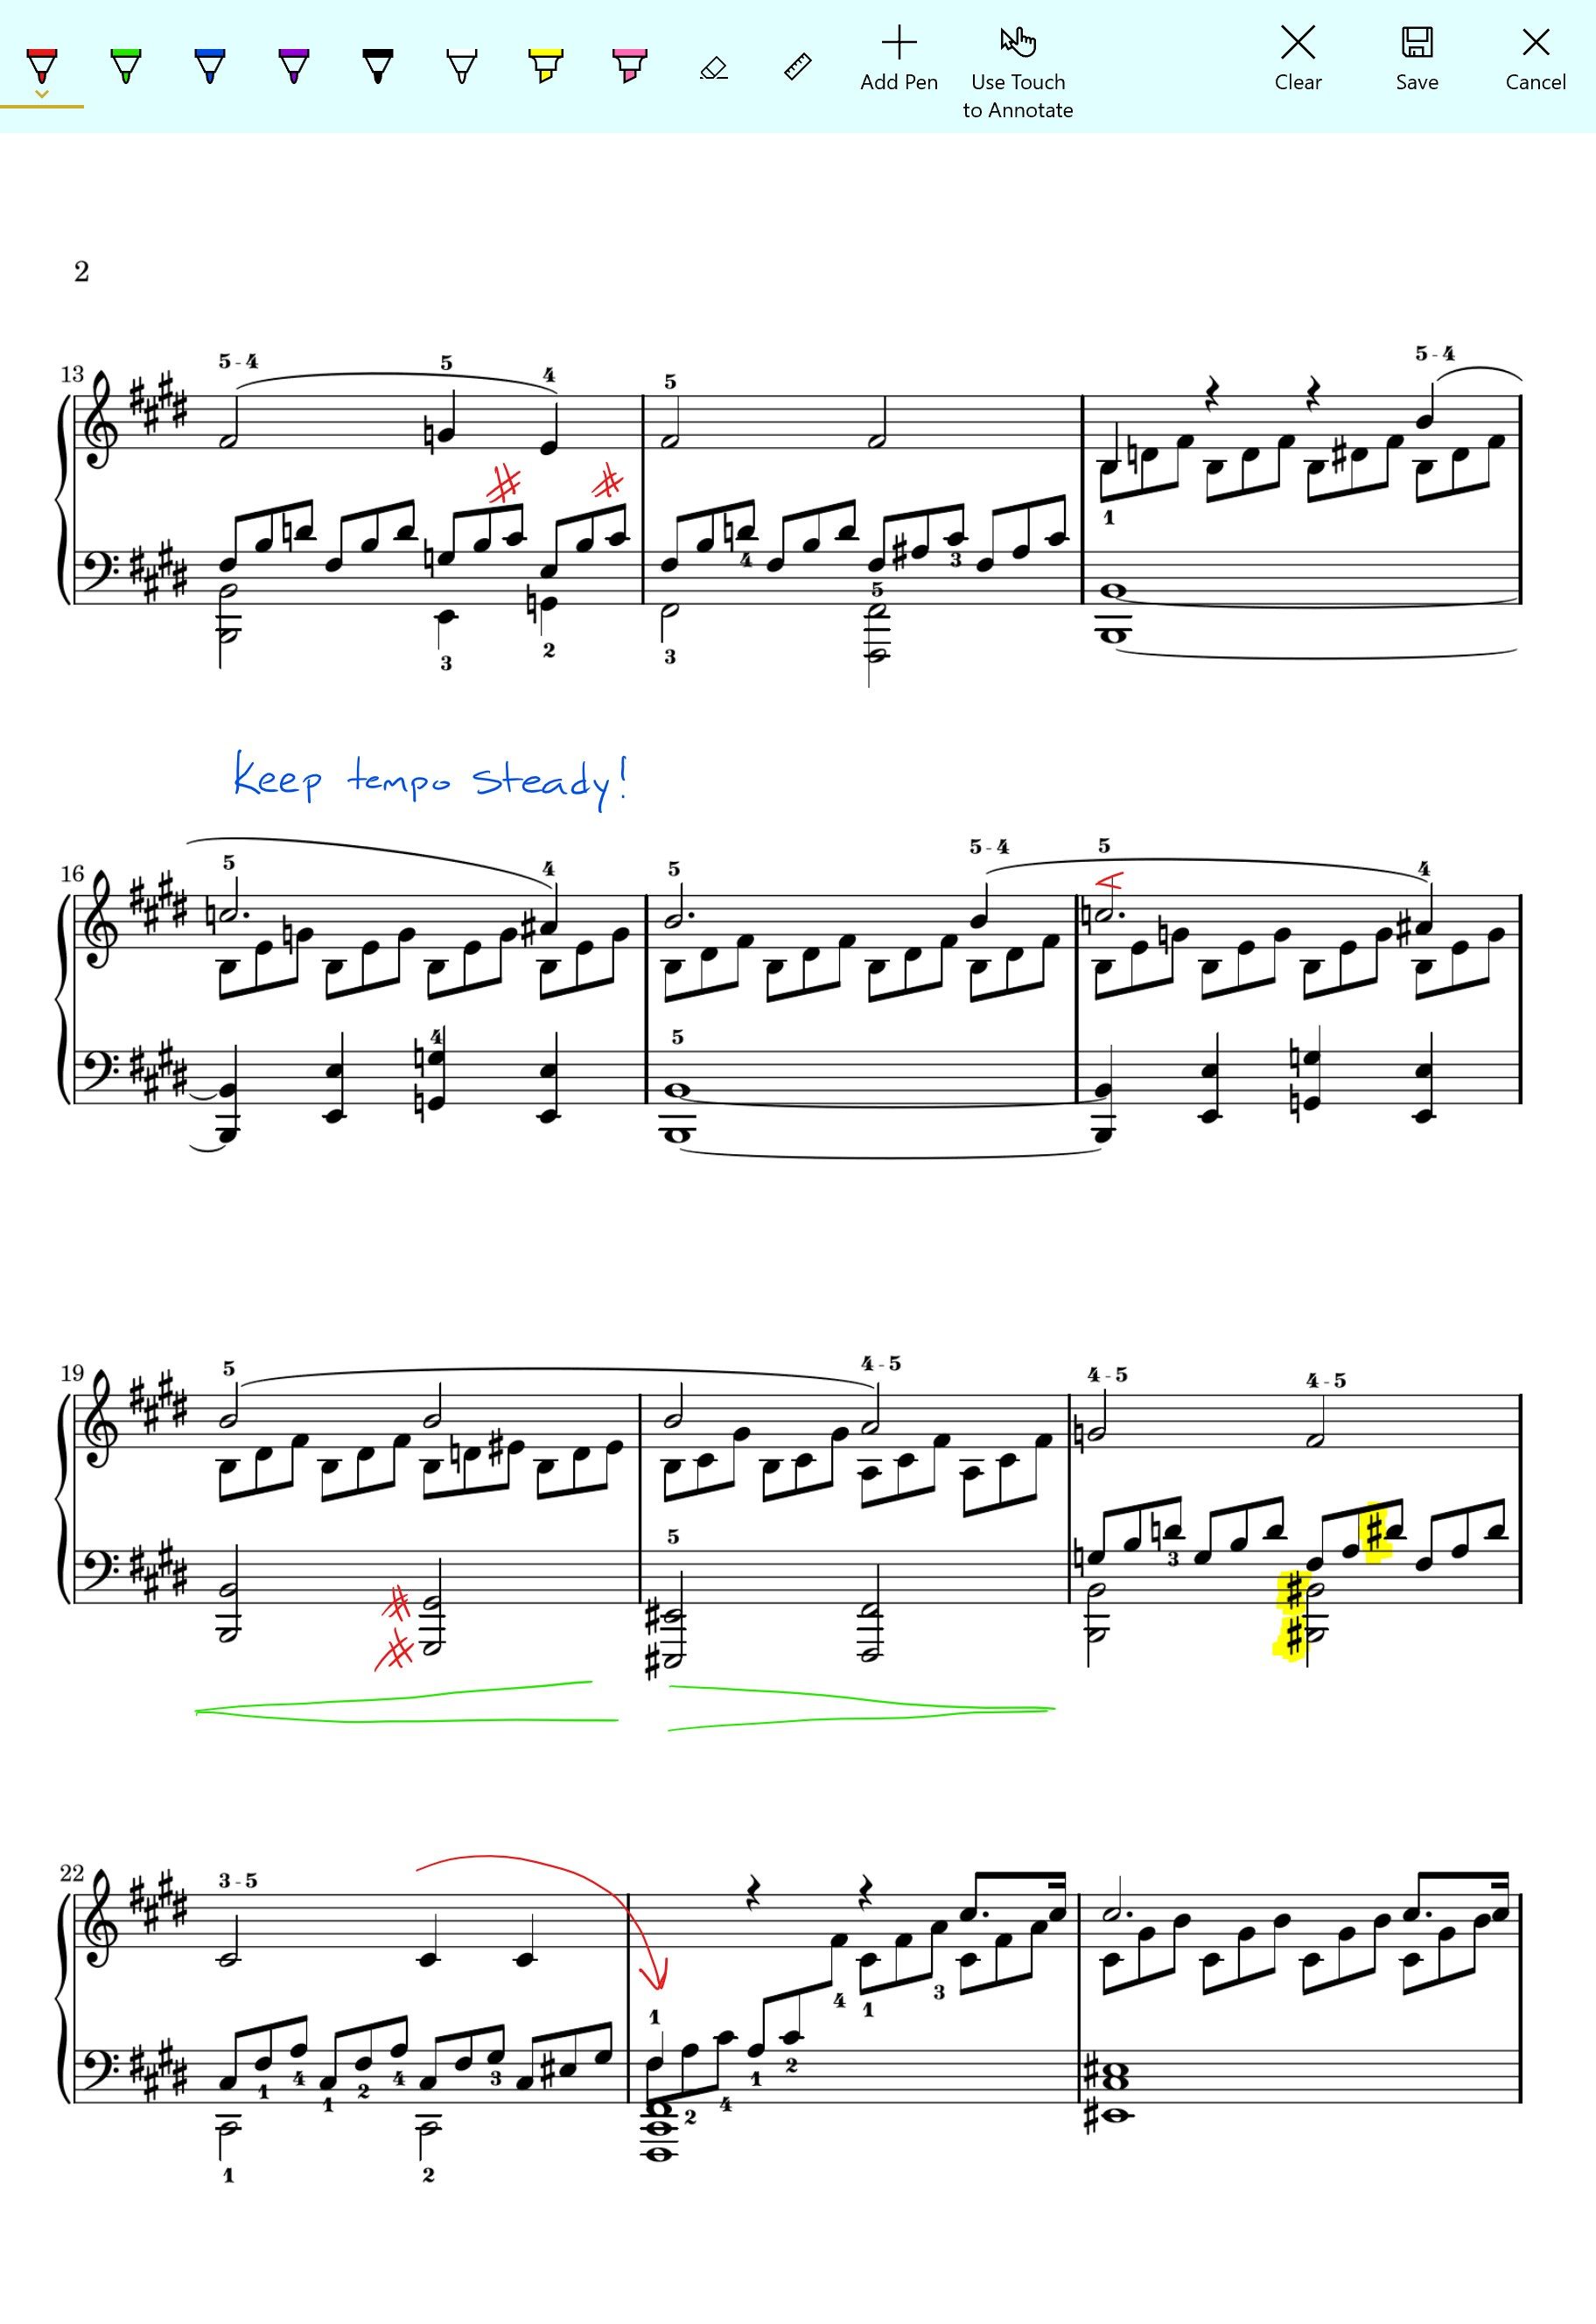 Annotate your music with markers and highlighters